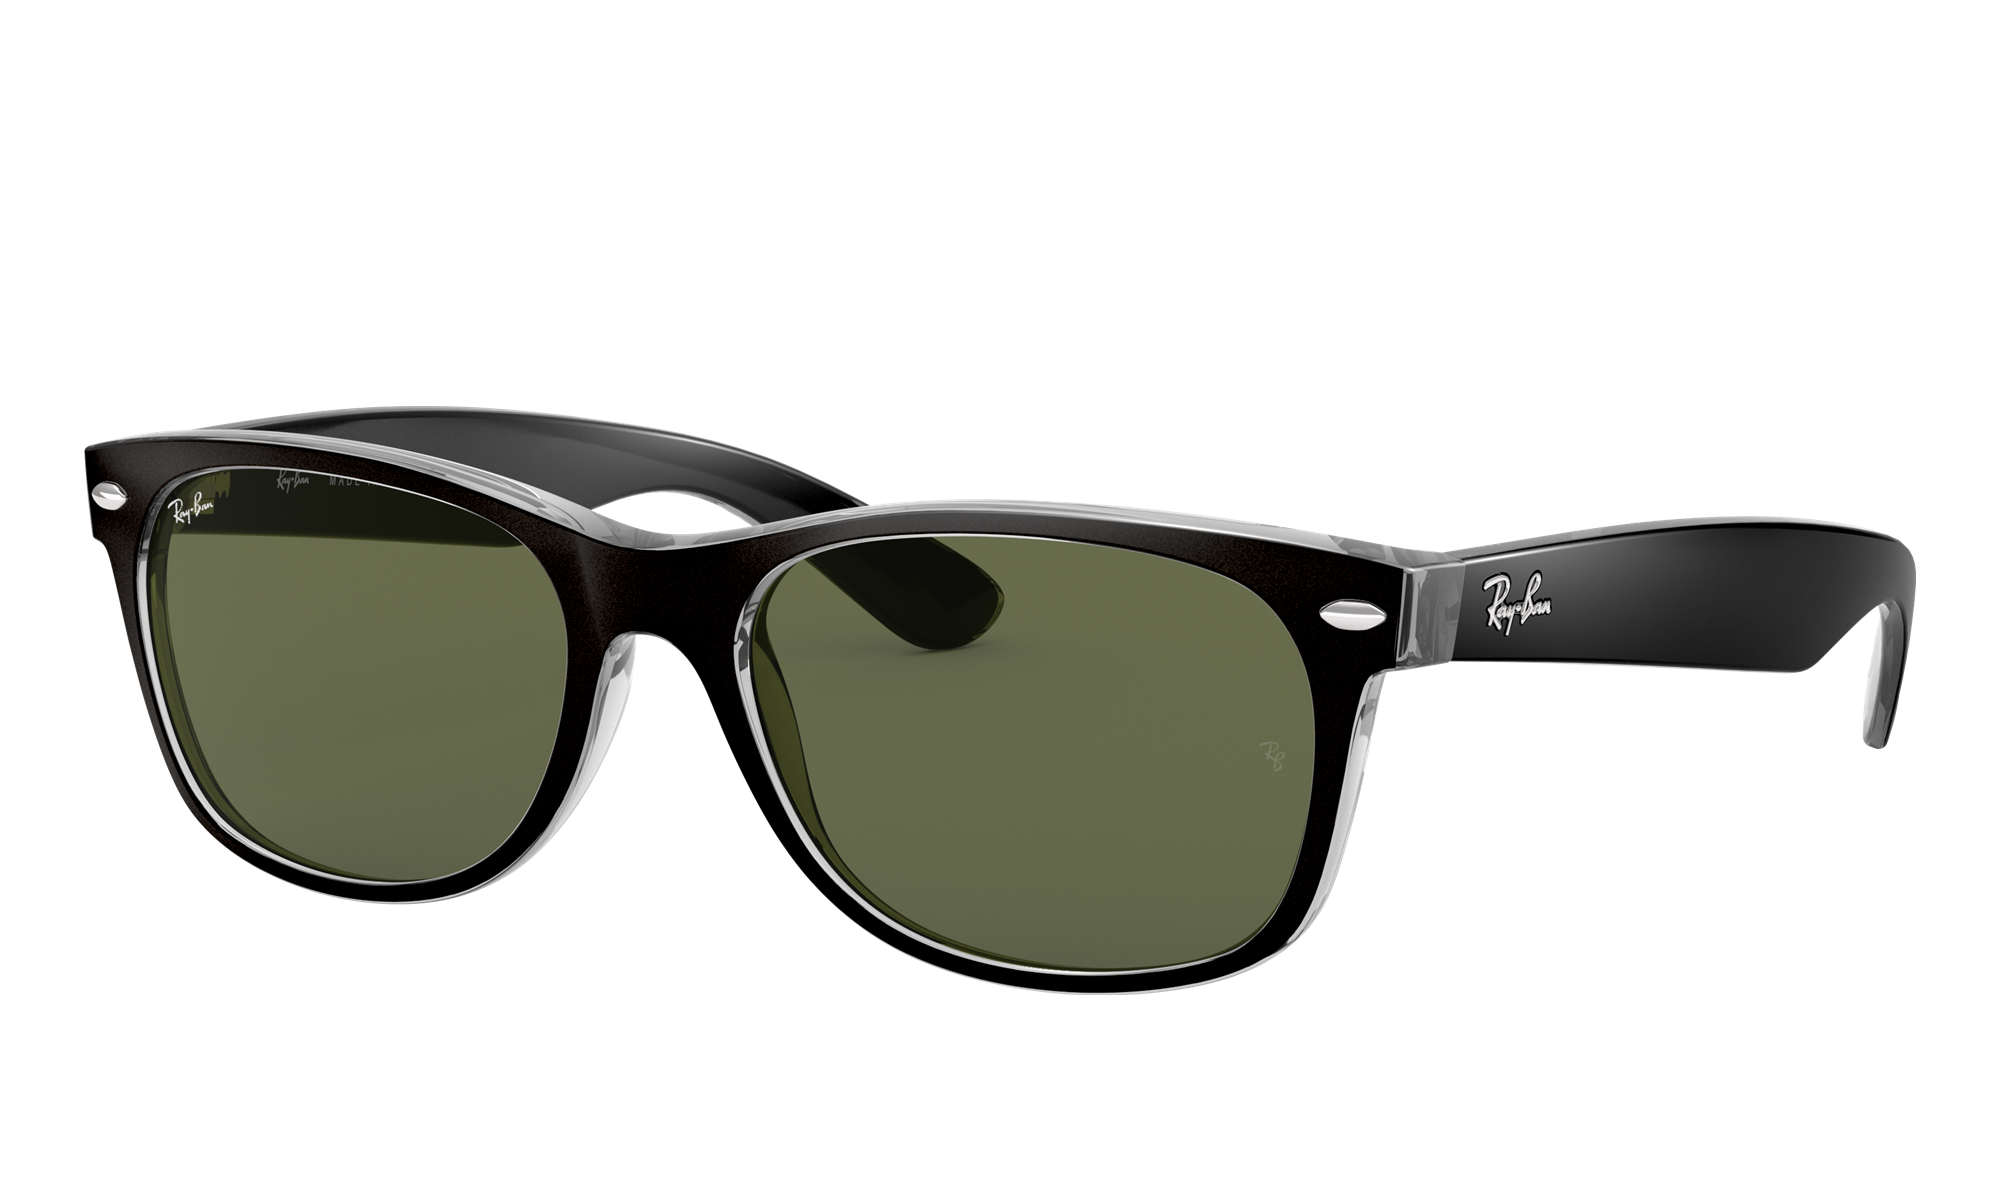 Ray-Ban Unisex Rb2132 Black On Transparent Size: Small